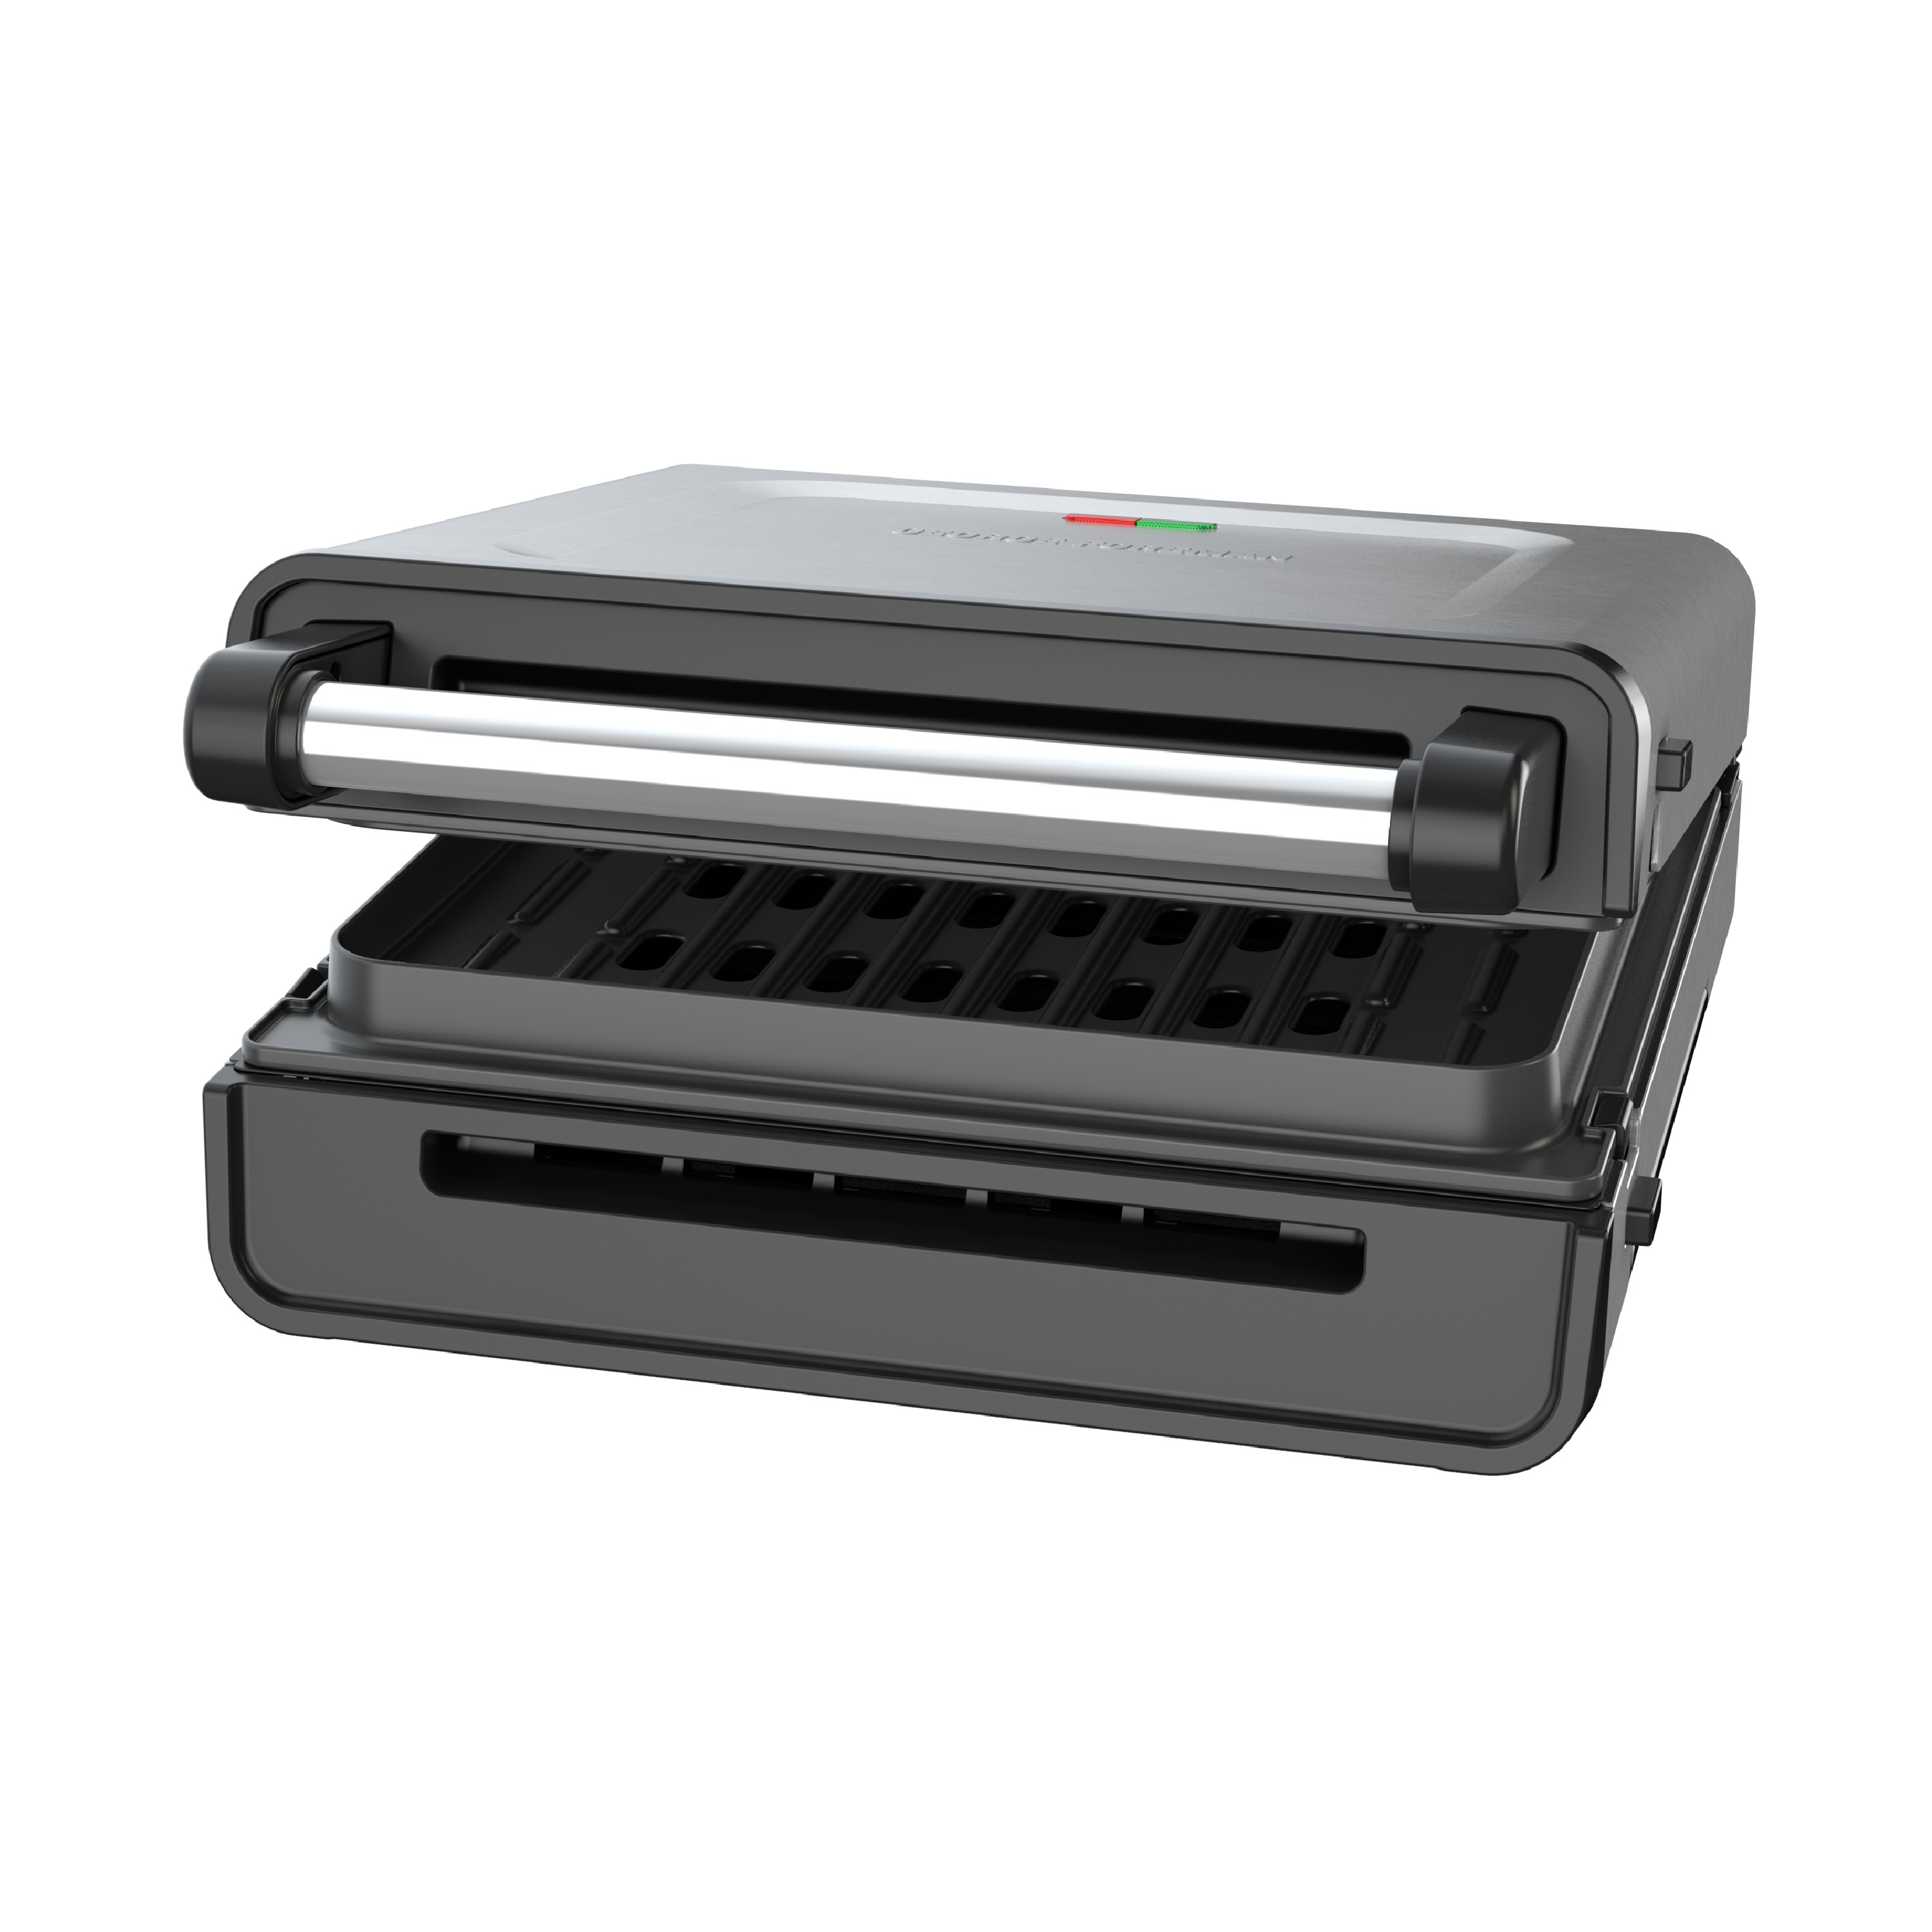 George Foreman Contact Smokeless - Ready Grill, Family Size (4-6 Servings), GRS6090B-1 - image 2 of 8